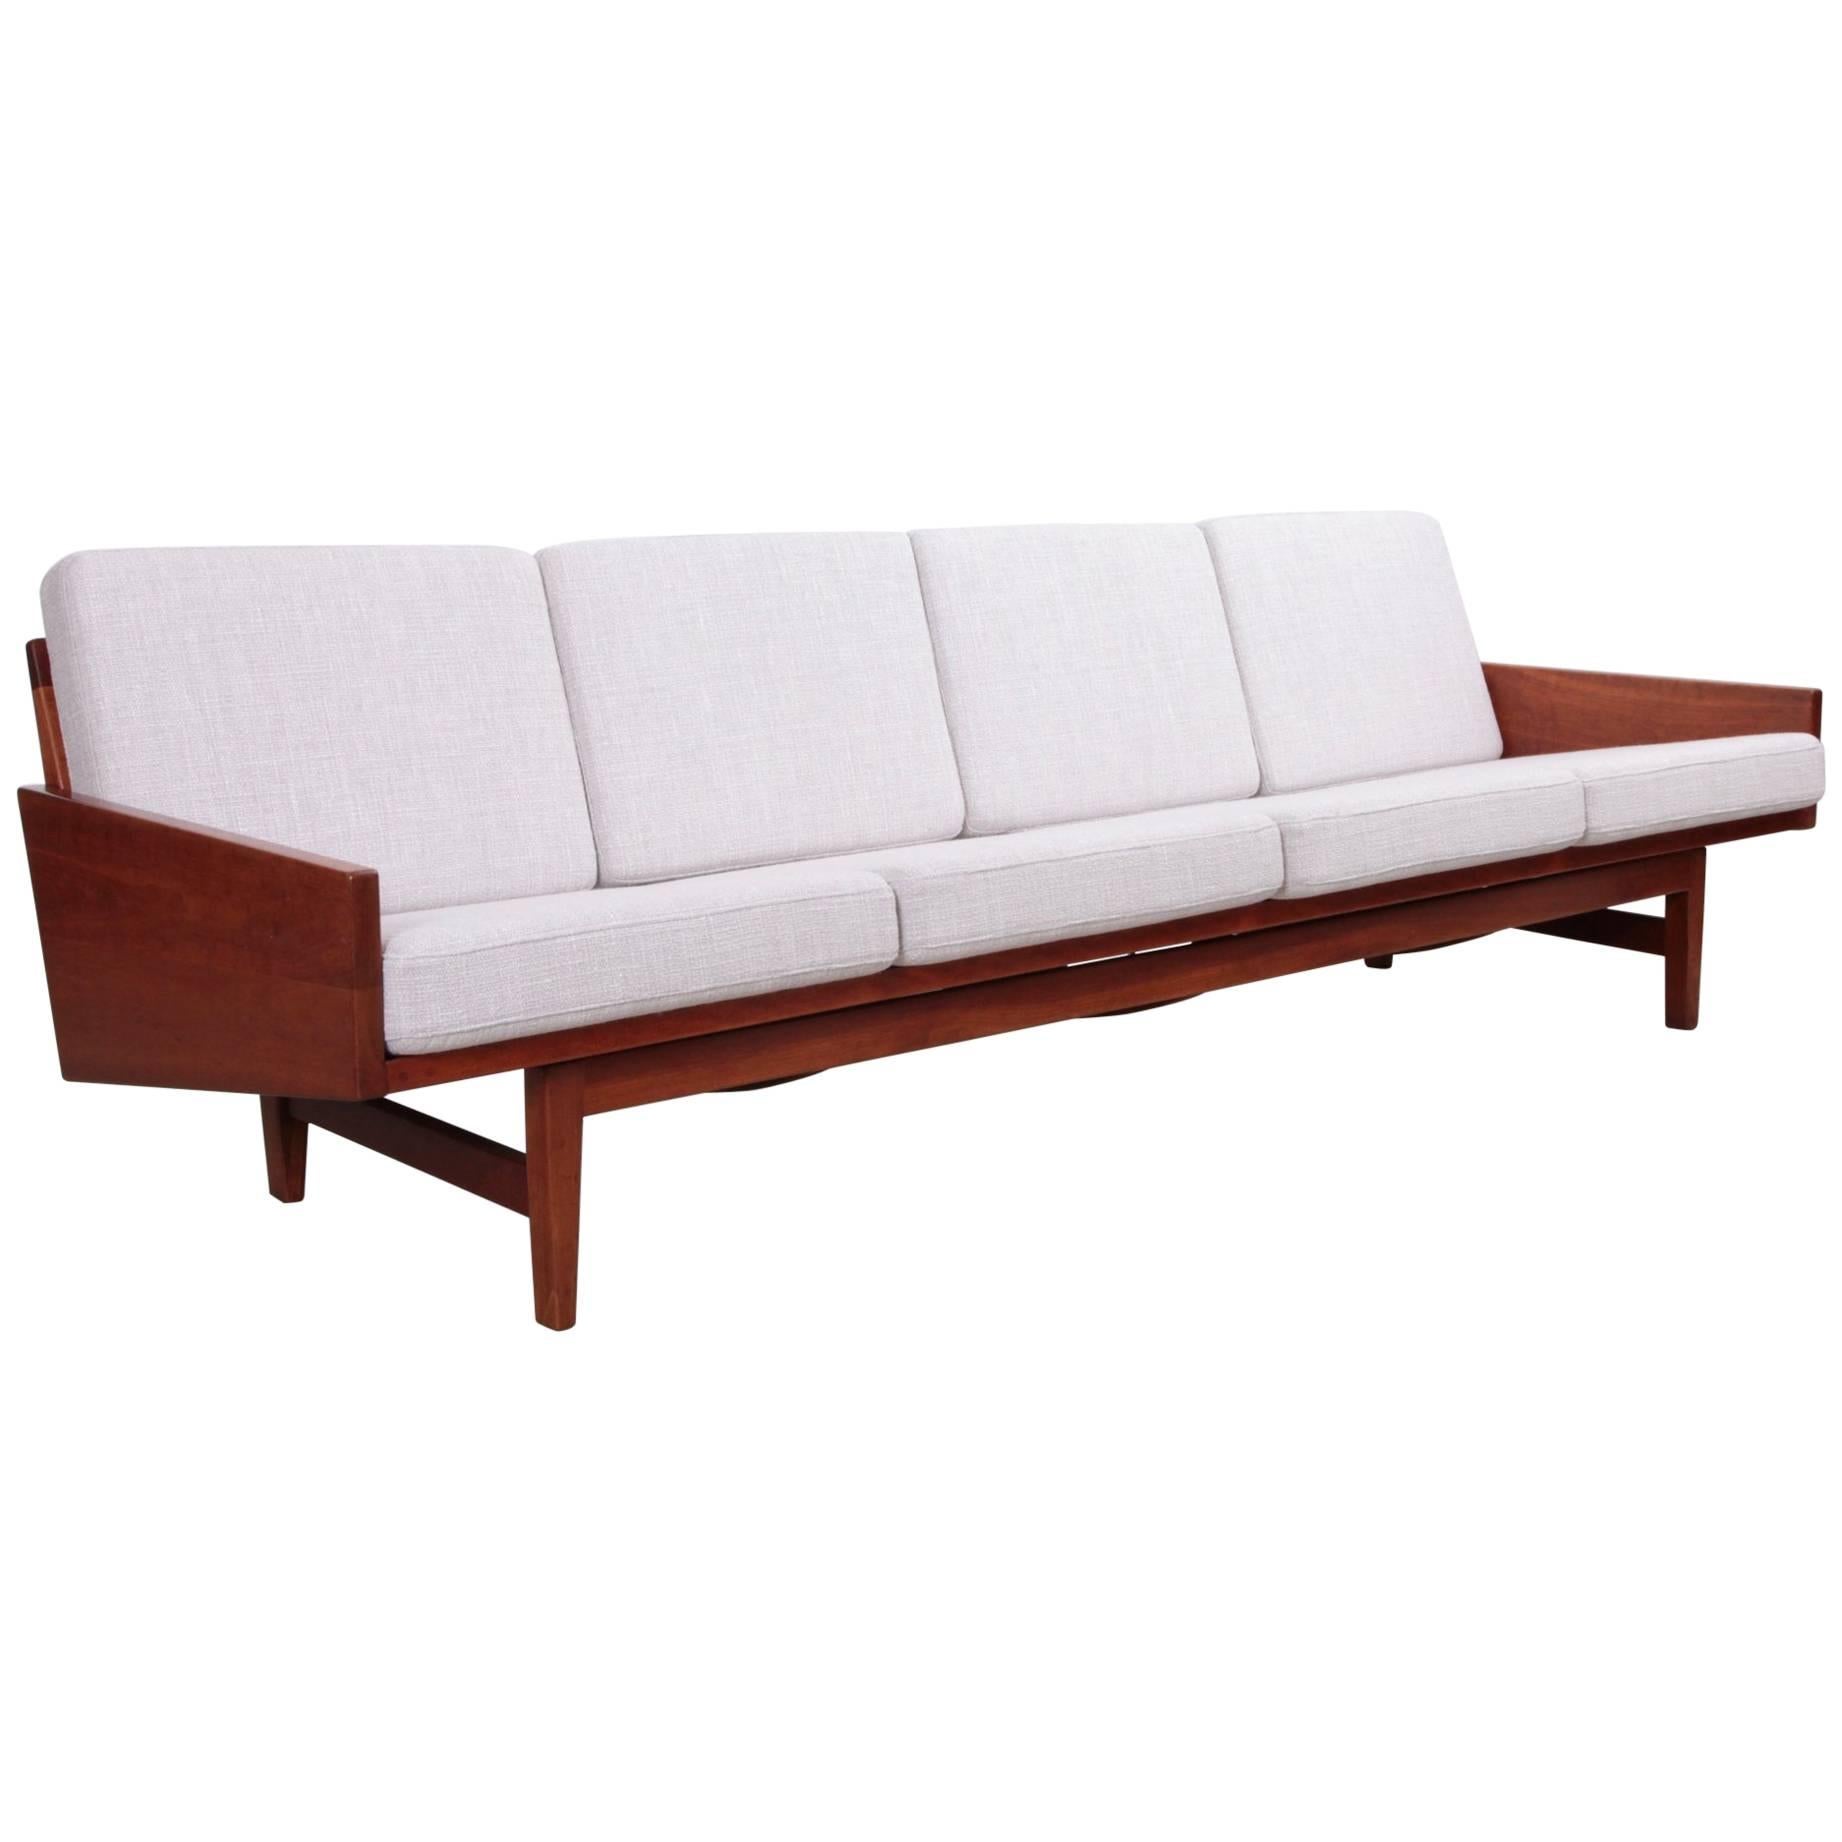 Rare Solid Walnut Arden Riddle White Four-Seat Sofa, USA, 1967 For Sale